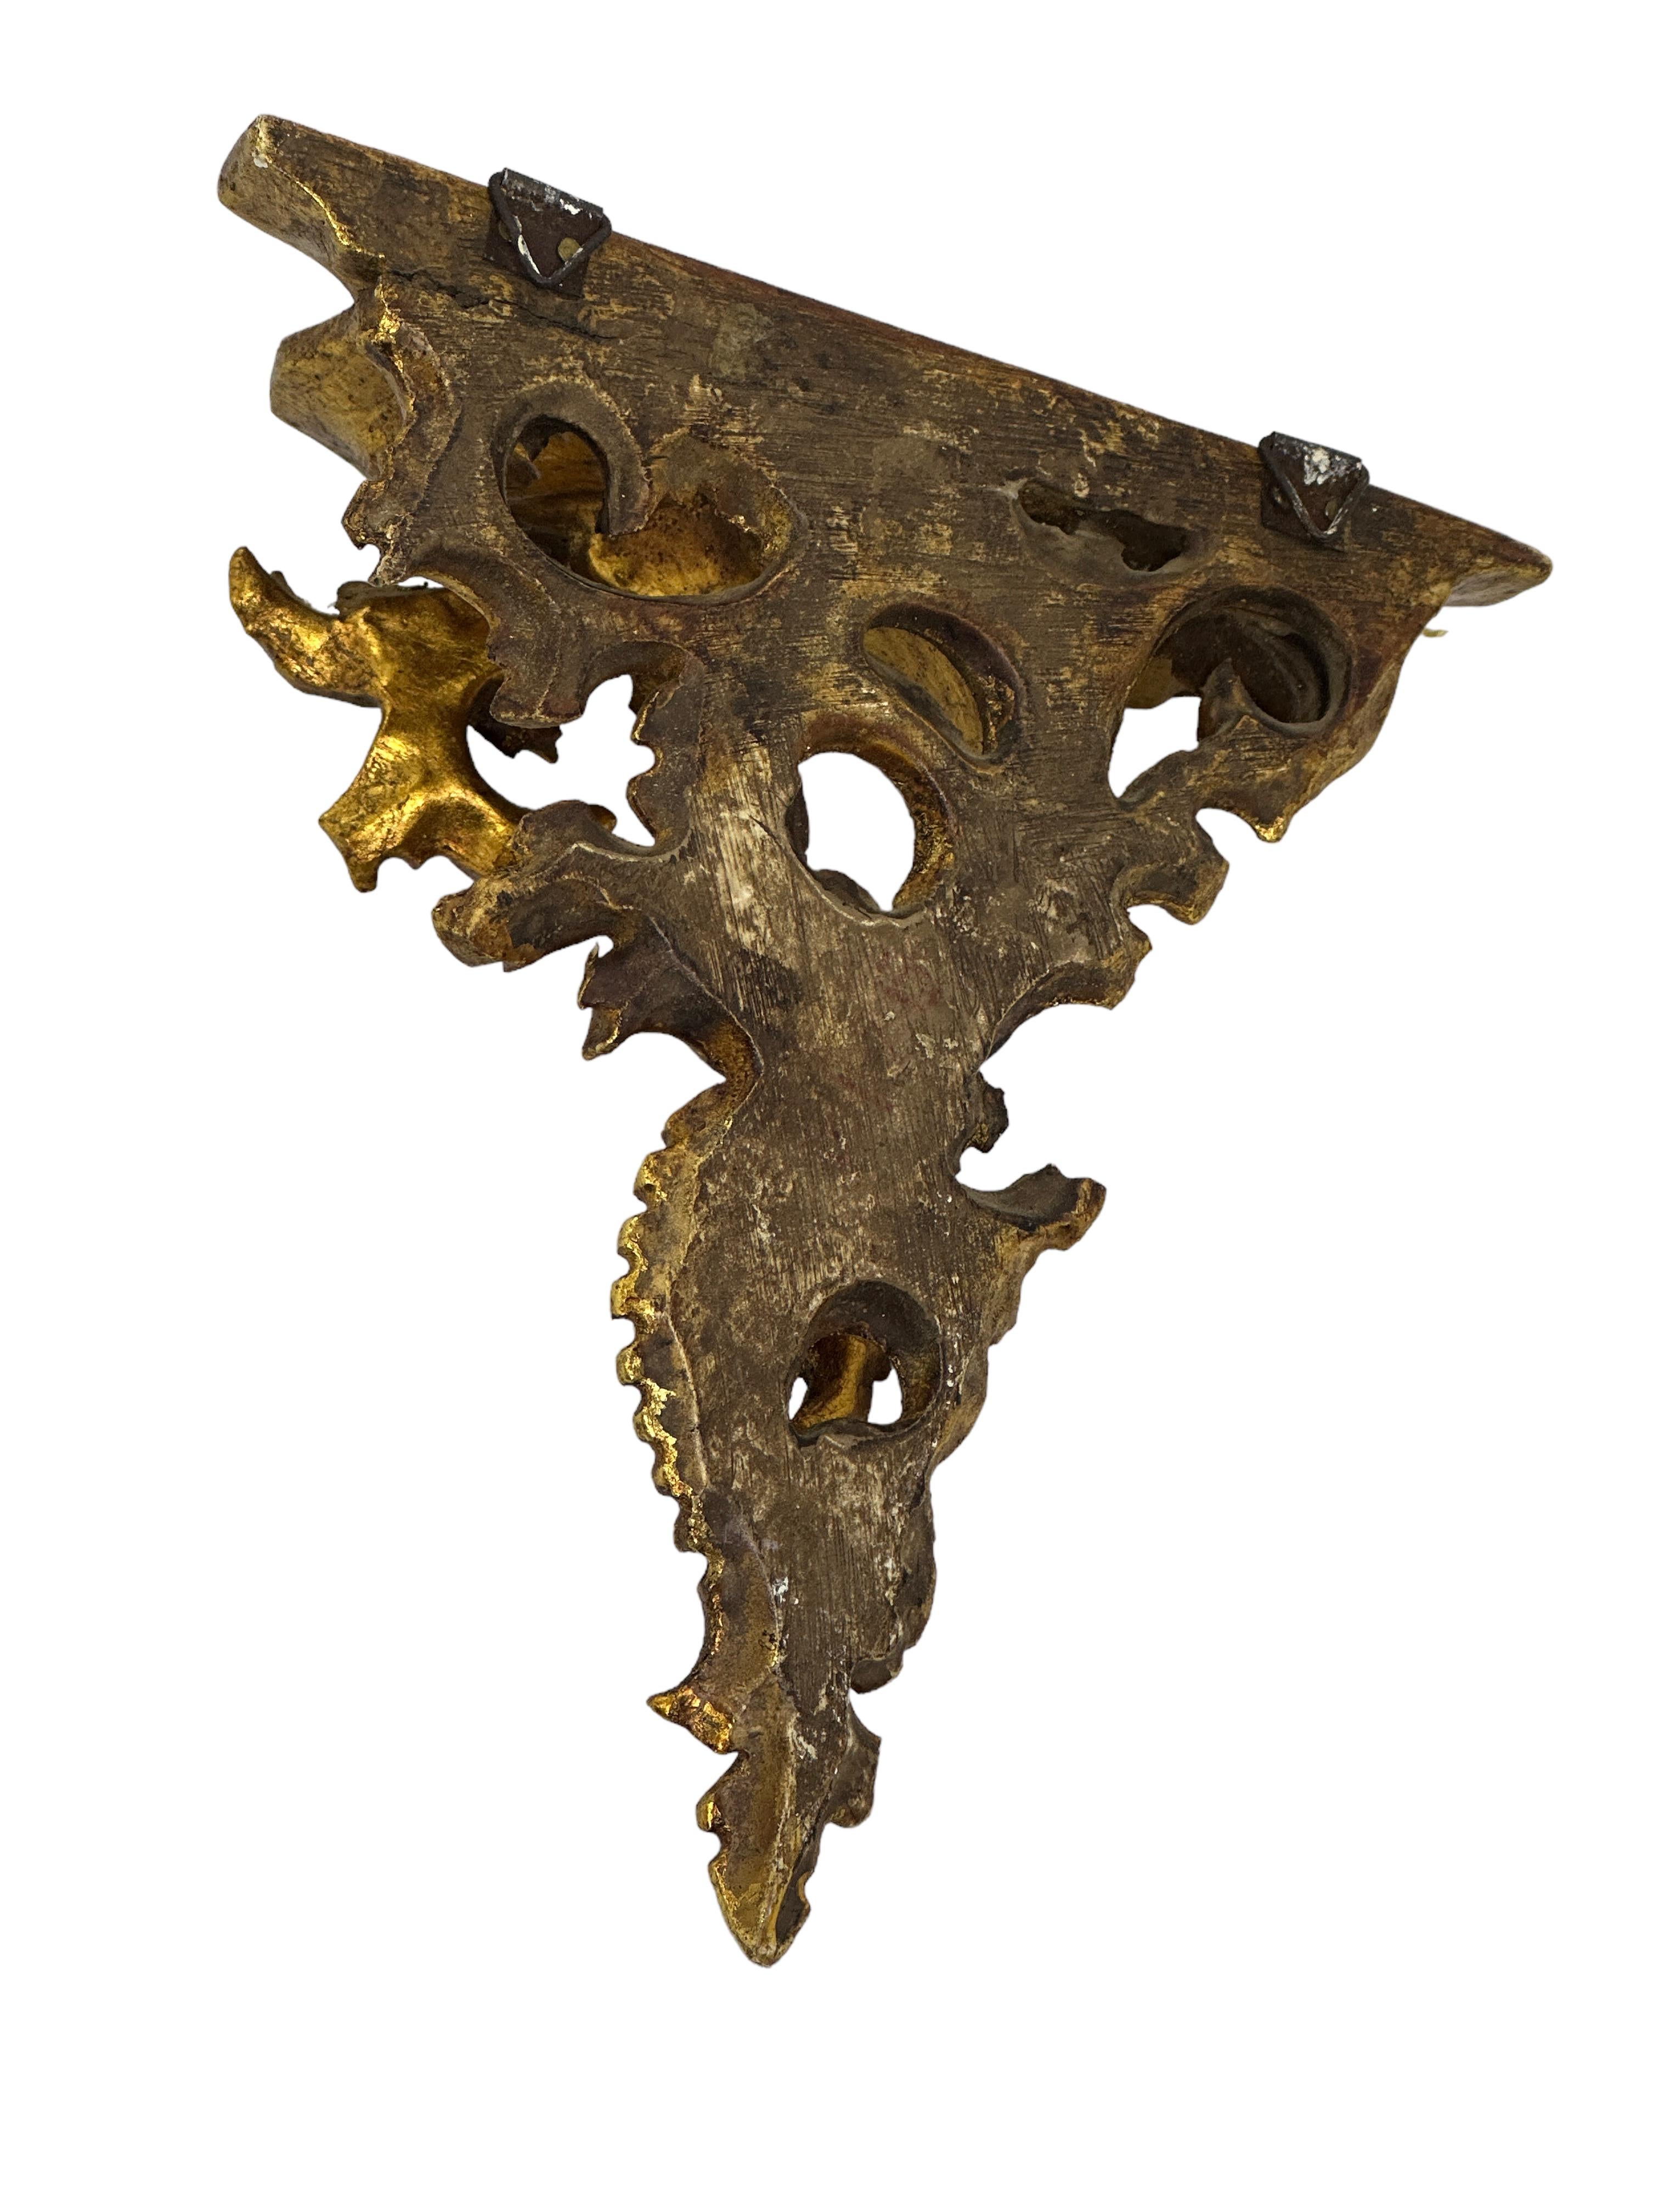 Italian Old Venetian Miniature Wall Shelf, Gilded Carved Acanthus, Rococo Style For Sale 3